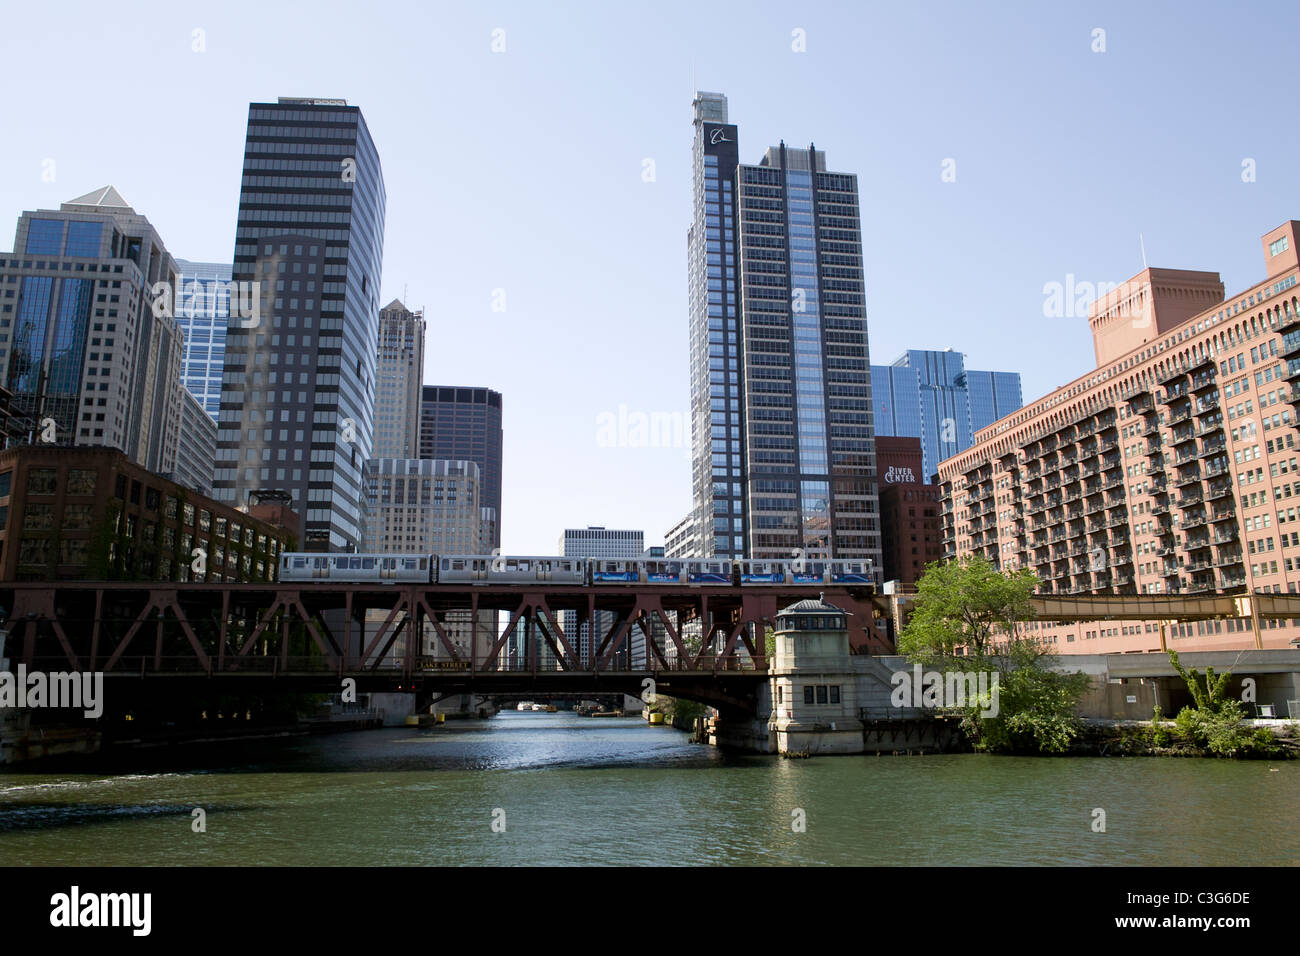 Buildings and a train along the Chicago River in Chicago, Illinois. Stock Photo